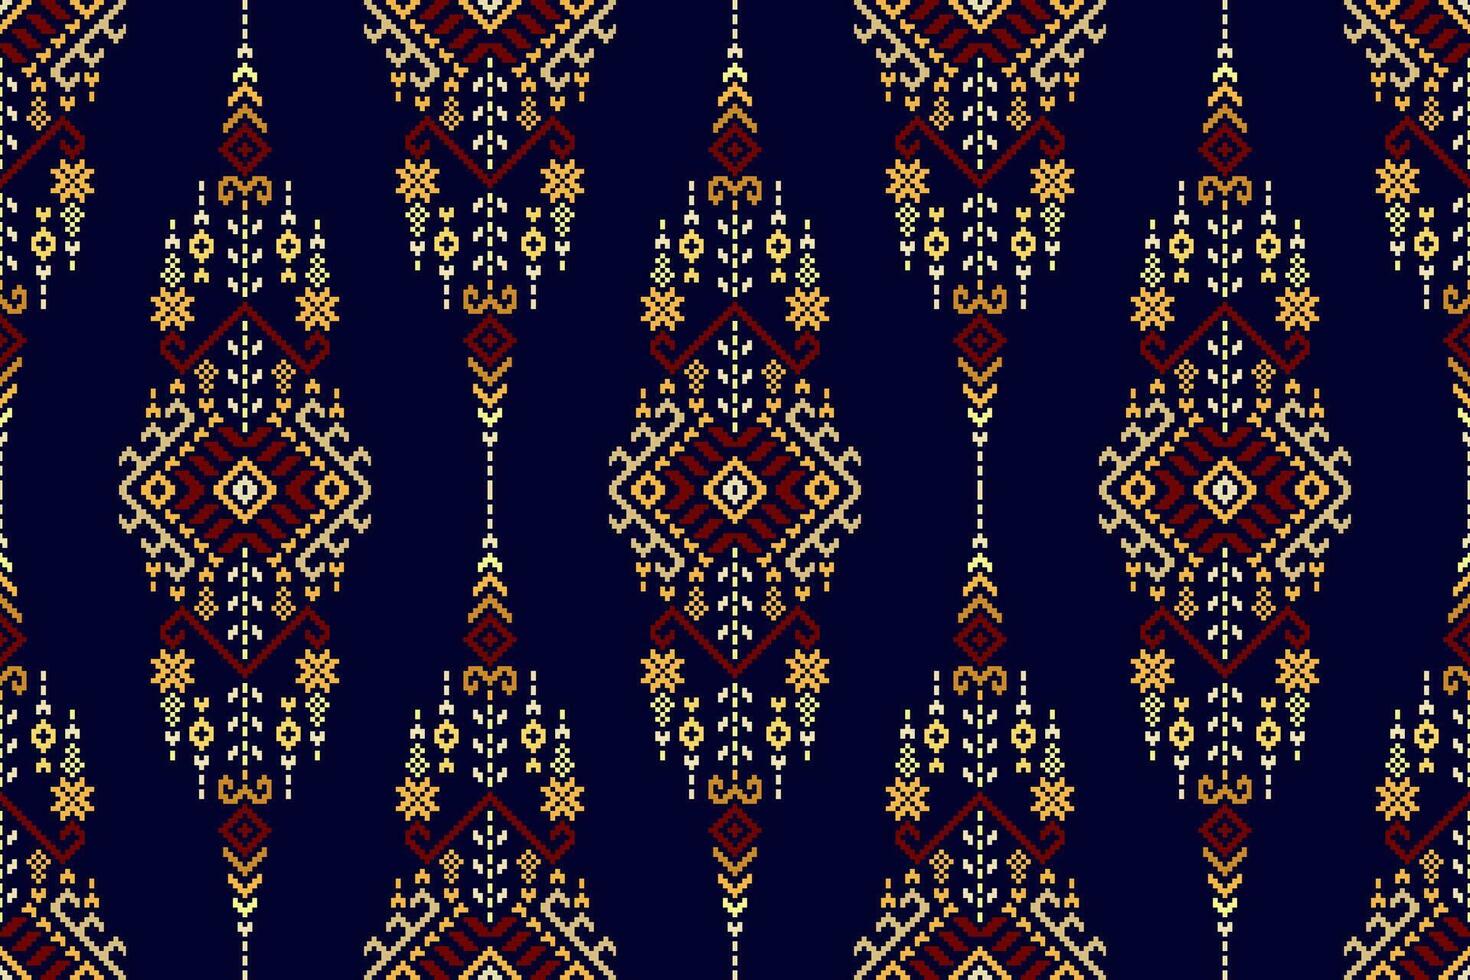 Geometric ethnic oriental seamless pattern traditional.Pixel pattern, Embroidery style.Design for clothing, fabric, batik, background, wallpaper, wrapping, knitwear vector